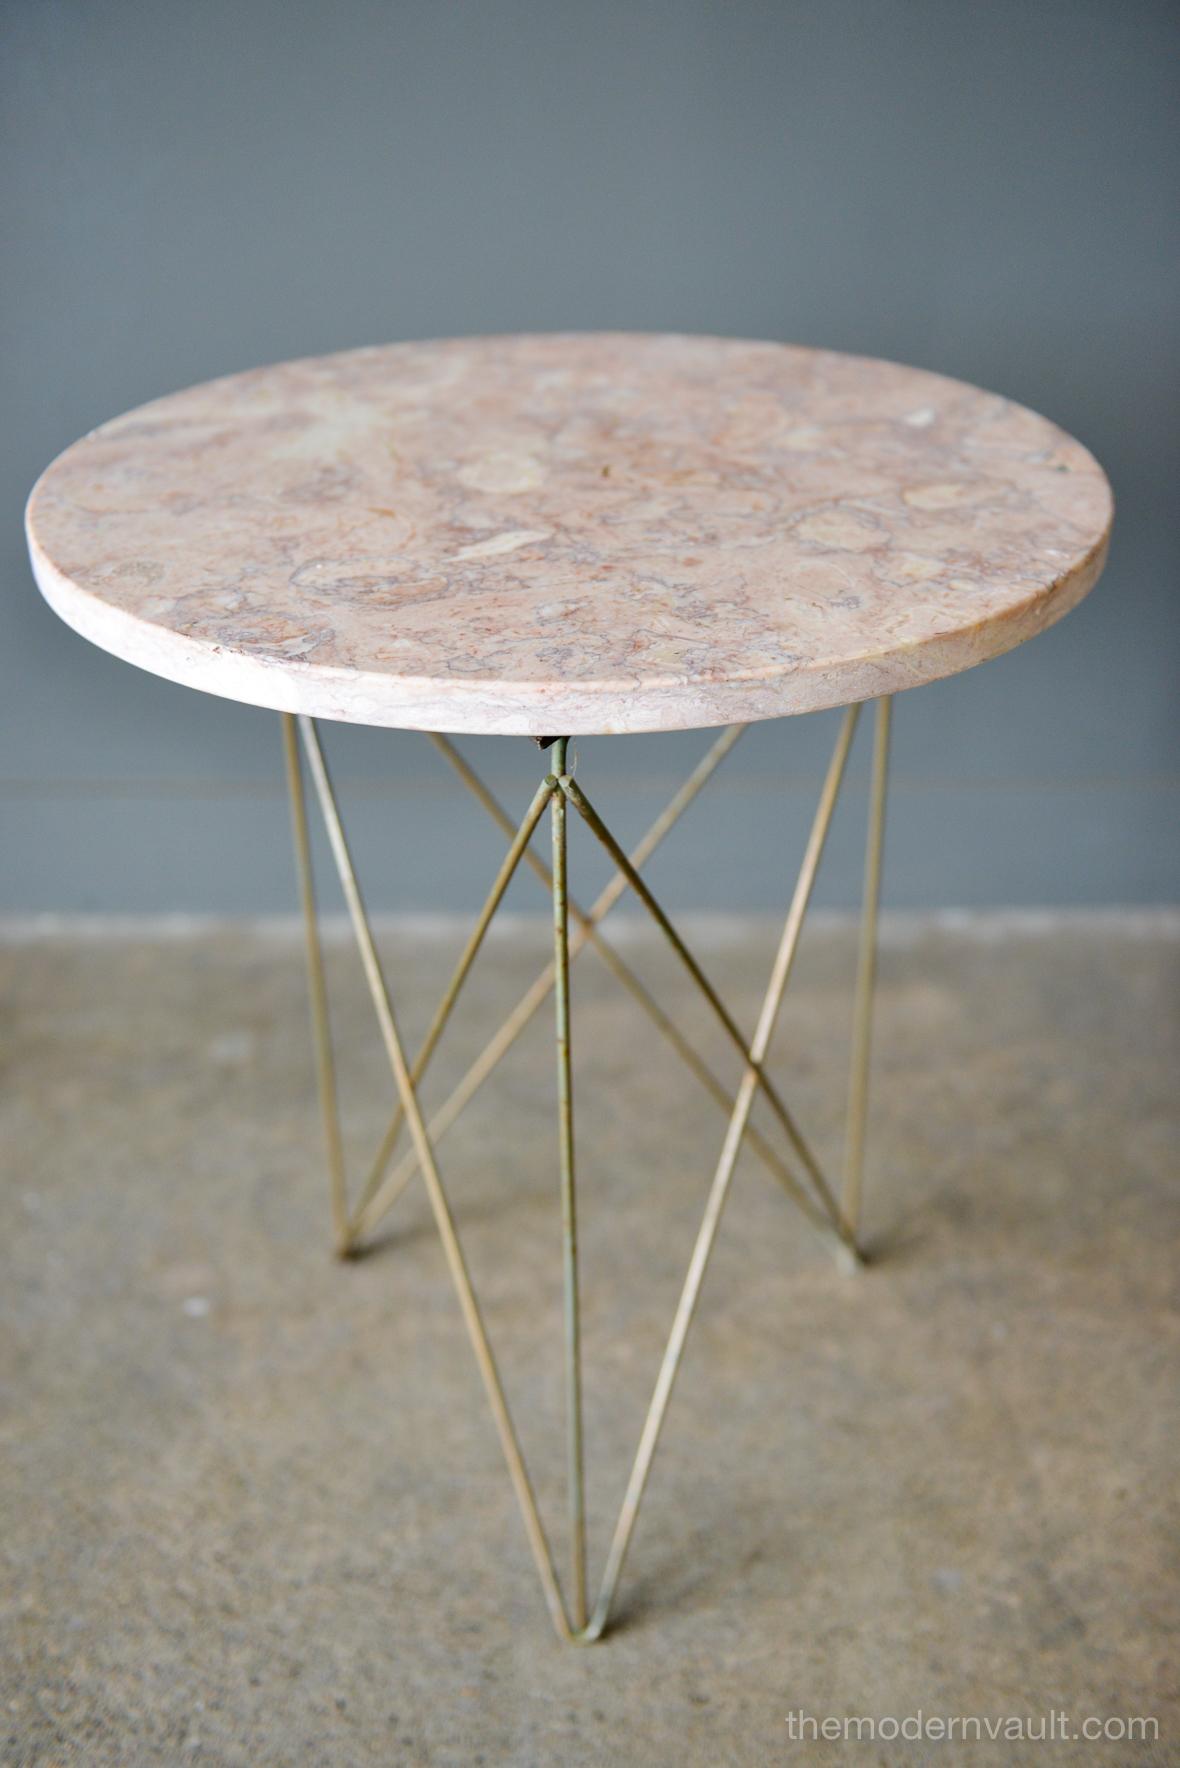 Martin Perfit for Rene Brancusi terrazzo stone and brass occasional table, circa 1955. Polished pink terrazzo with brass rod strut base, circa 1955. Good vintage condition with age appropriate patina to brass rods. Small natural imperfection in the